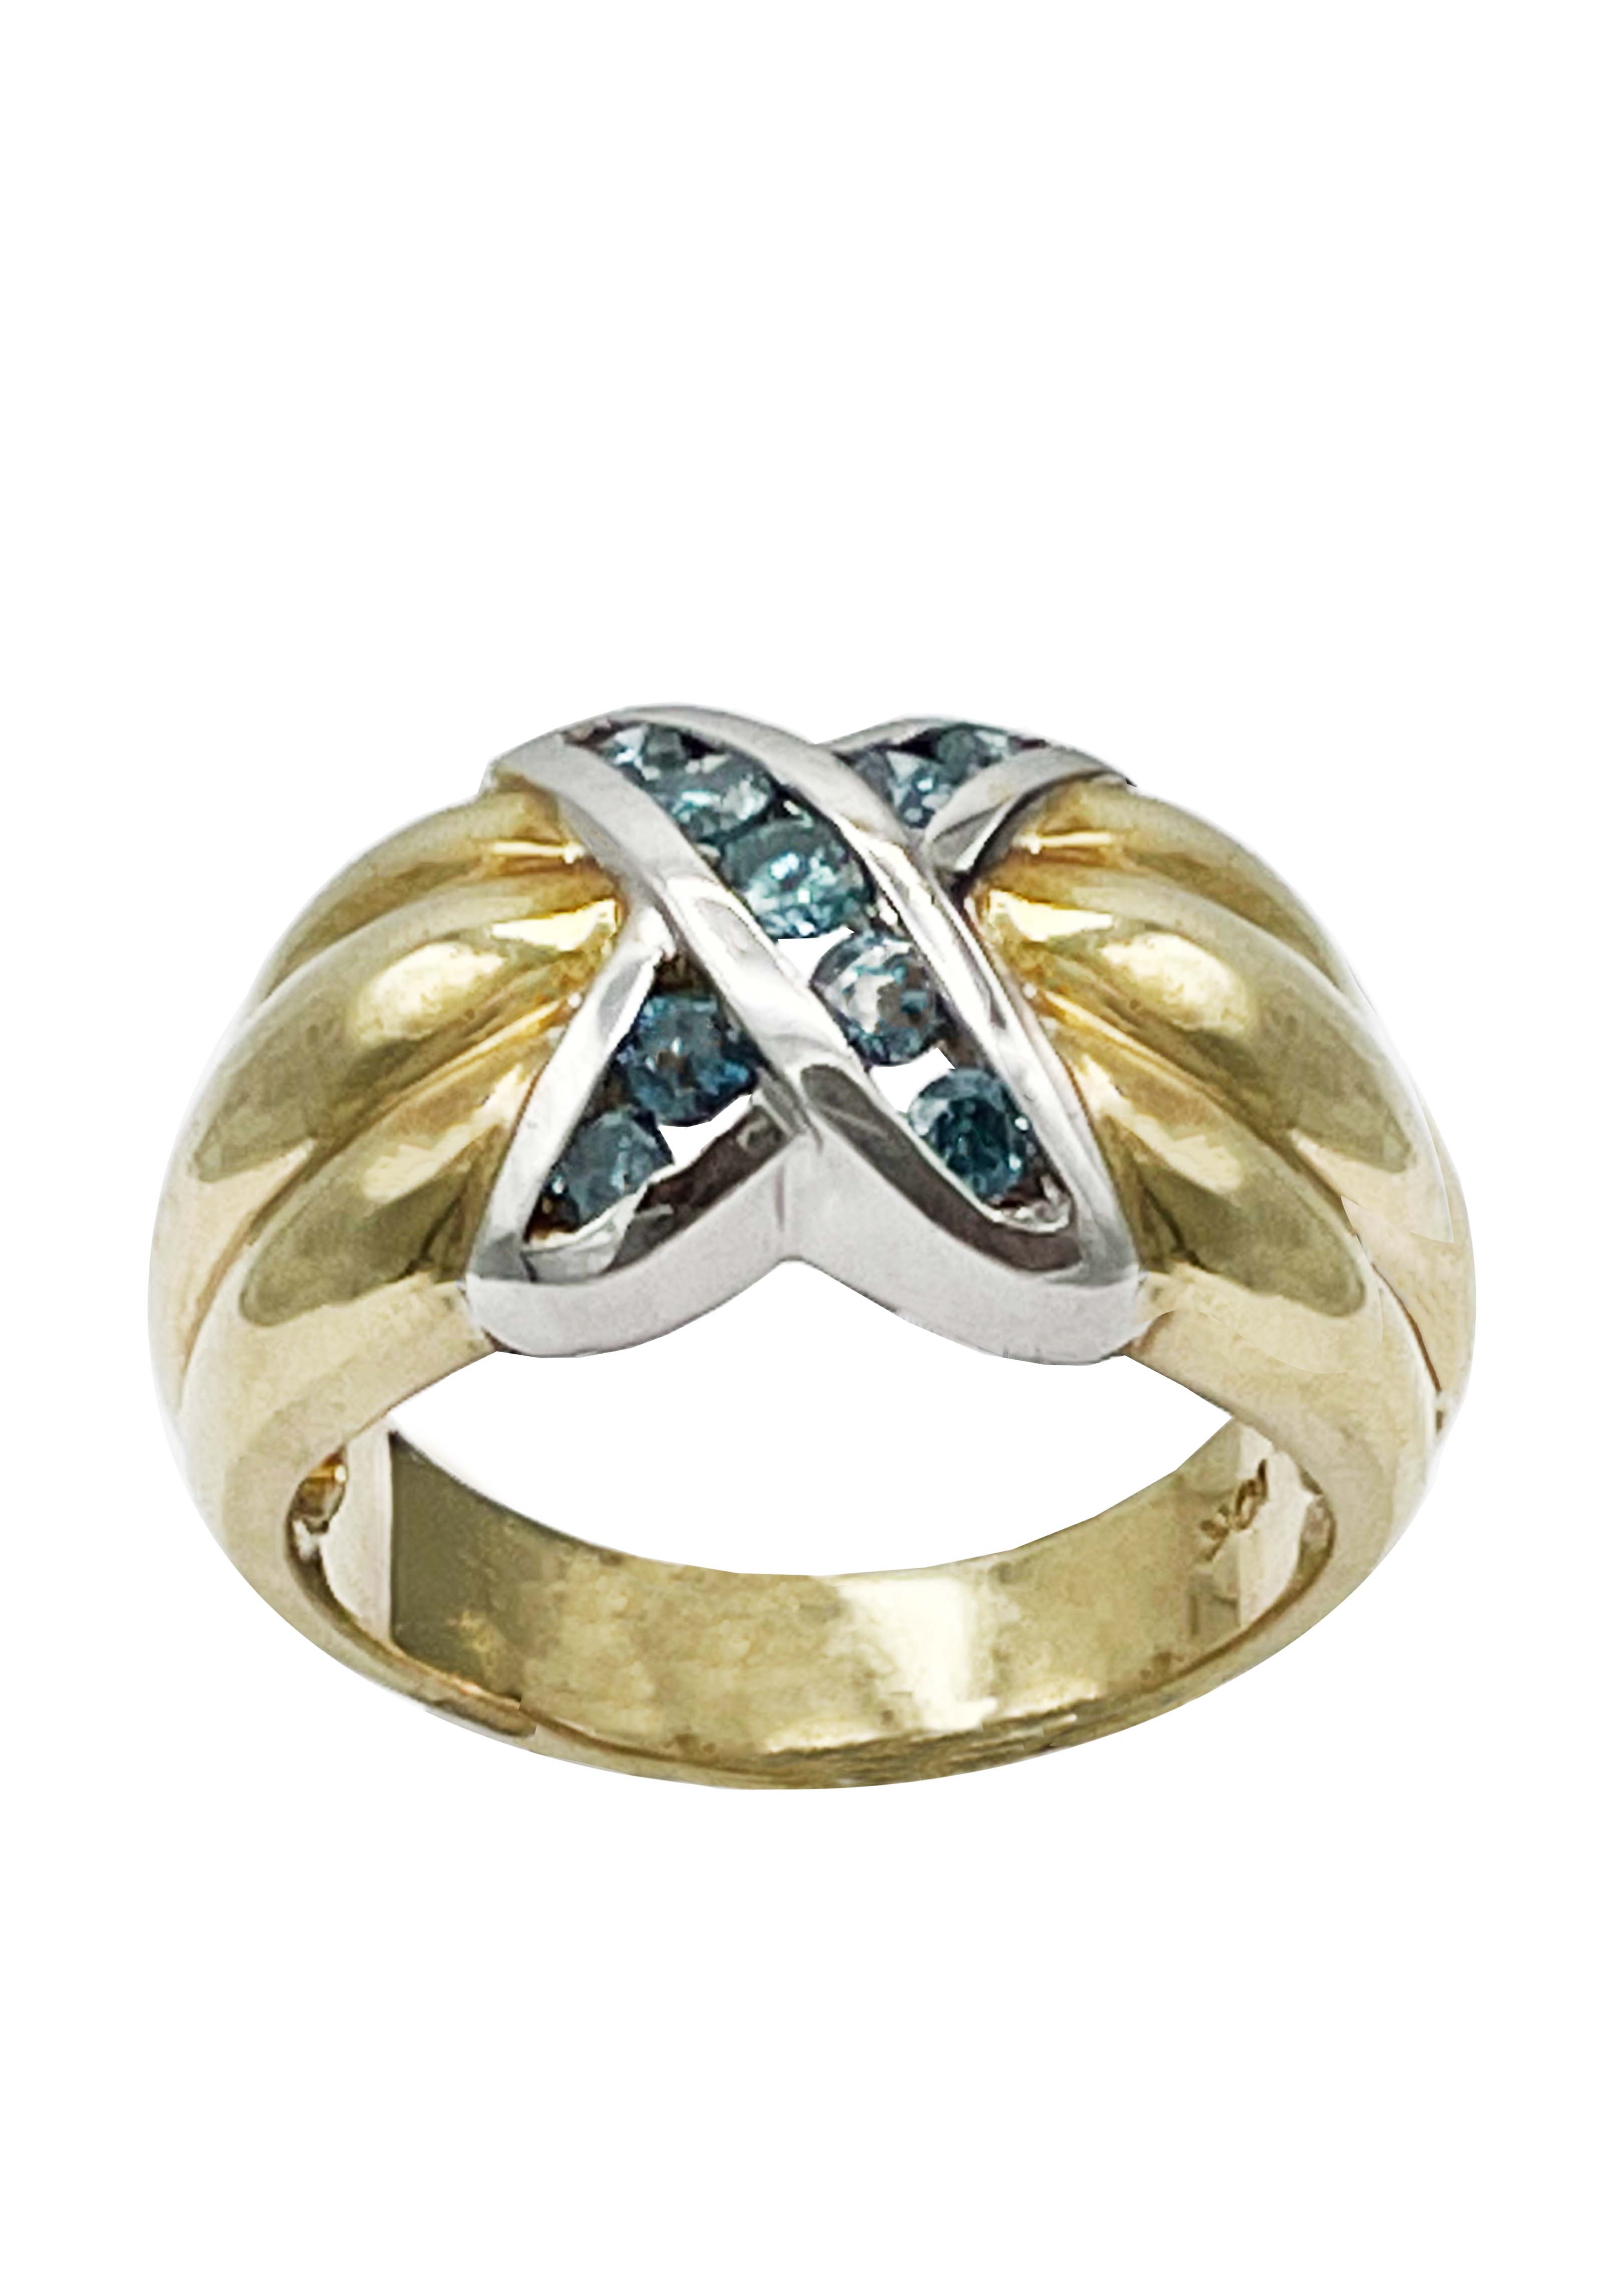 10k Yellow and White Gold Blue Diamond Ring Image